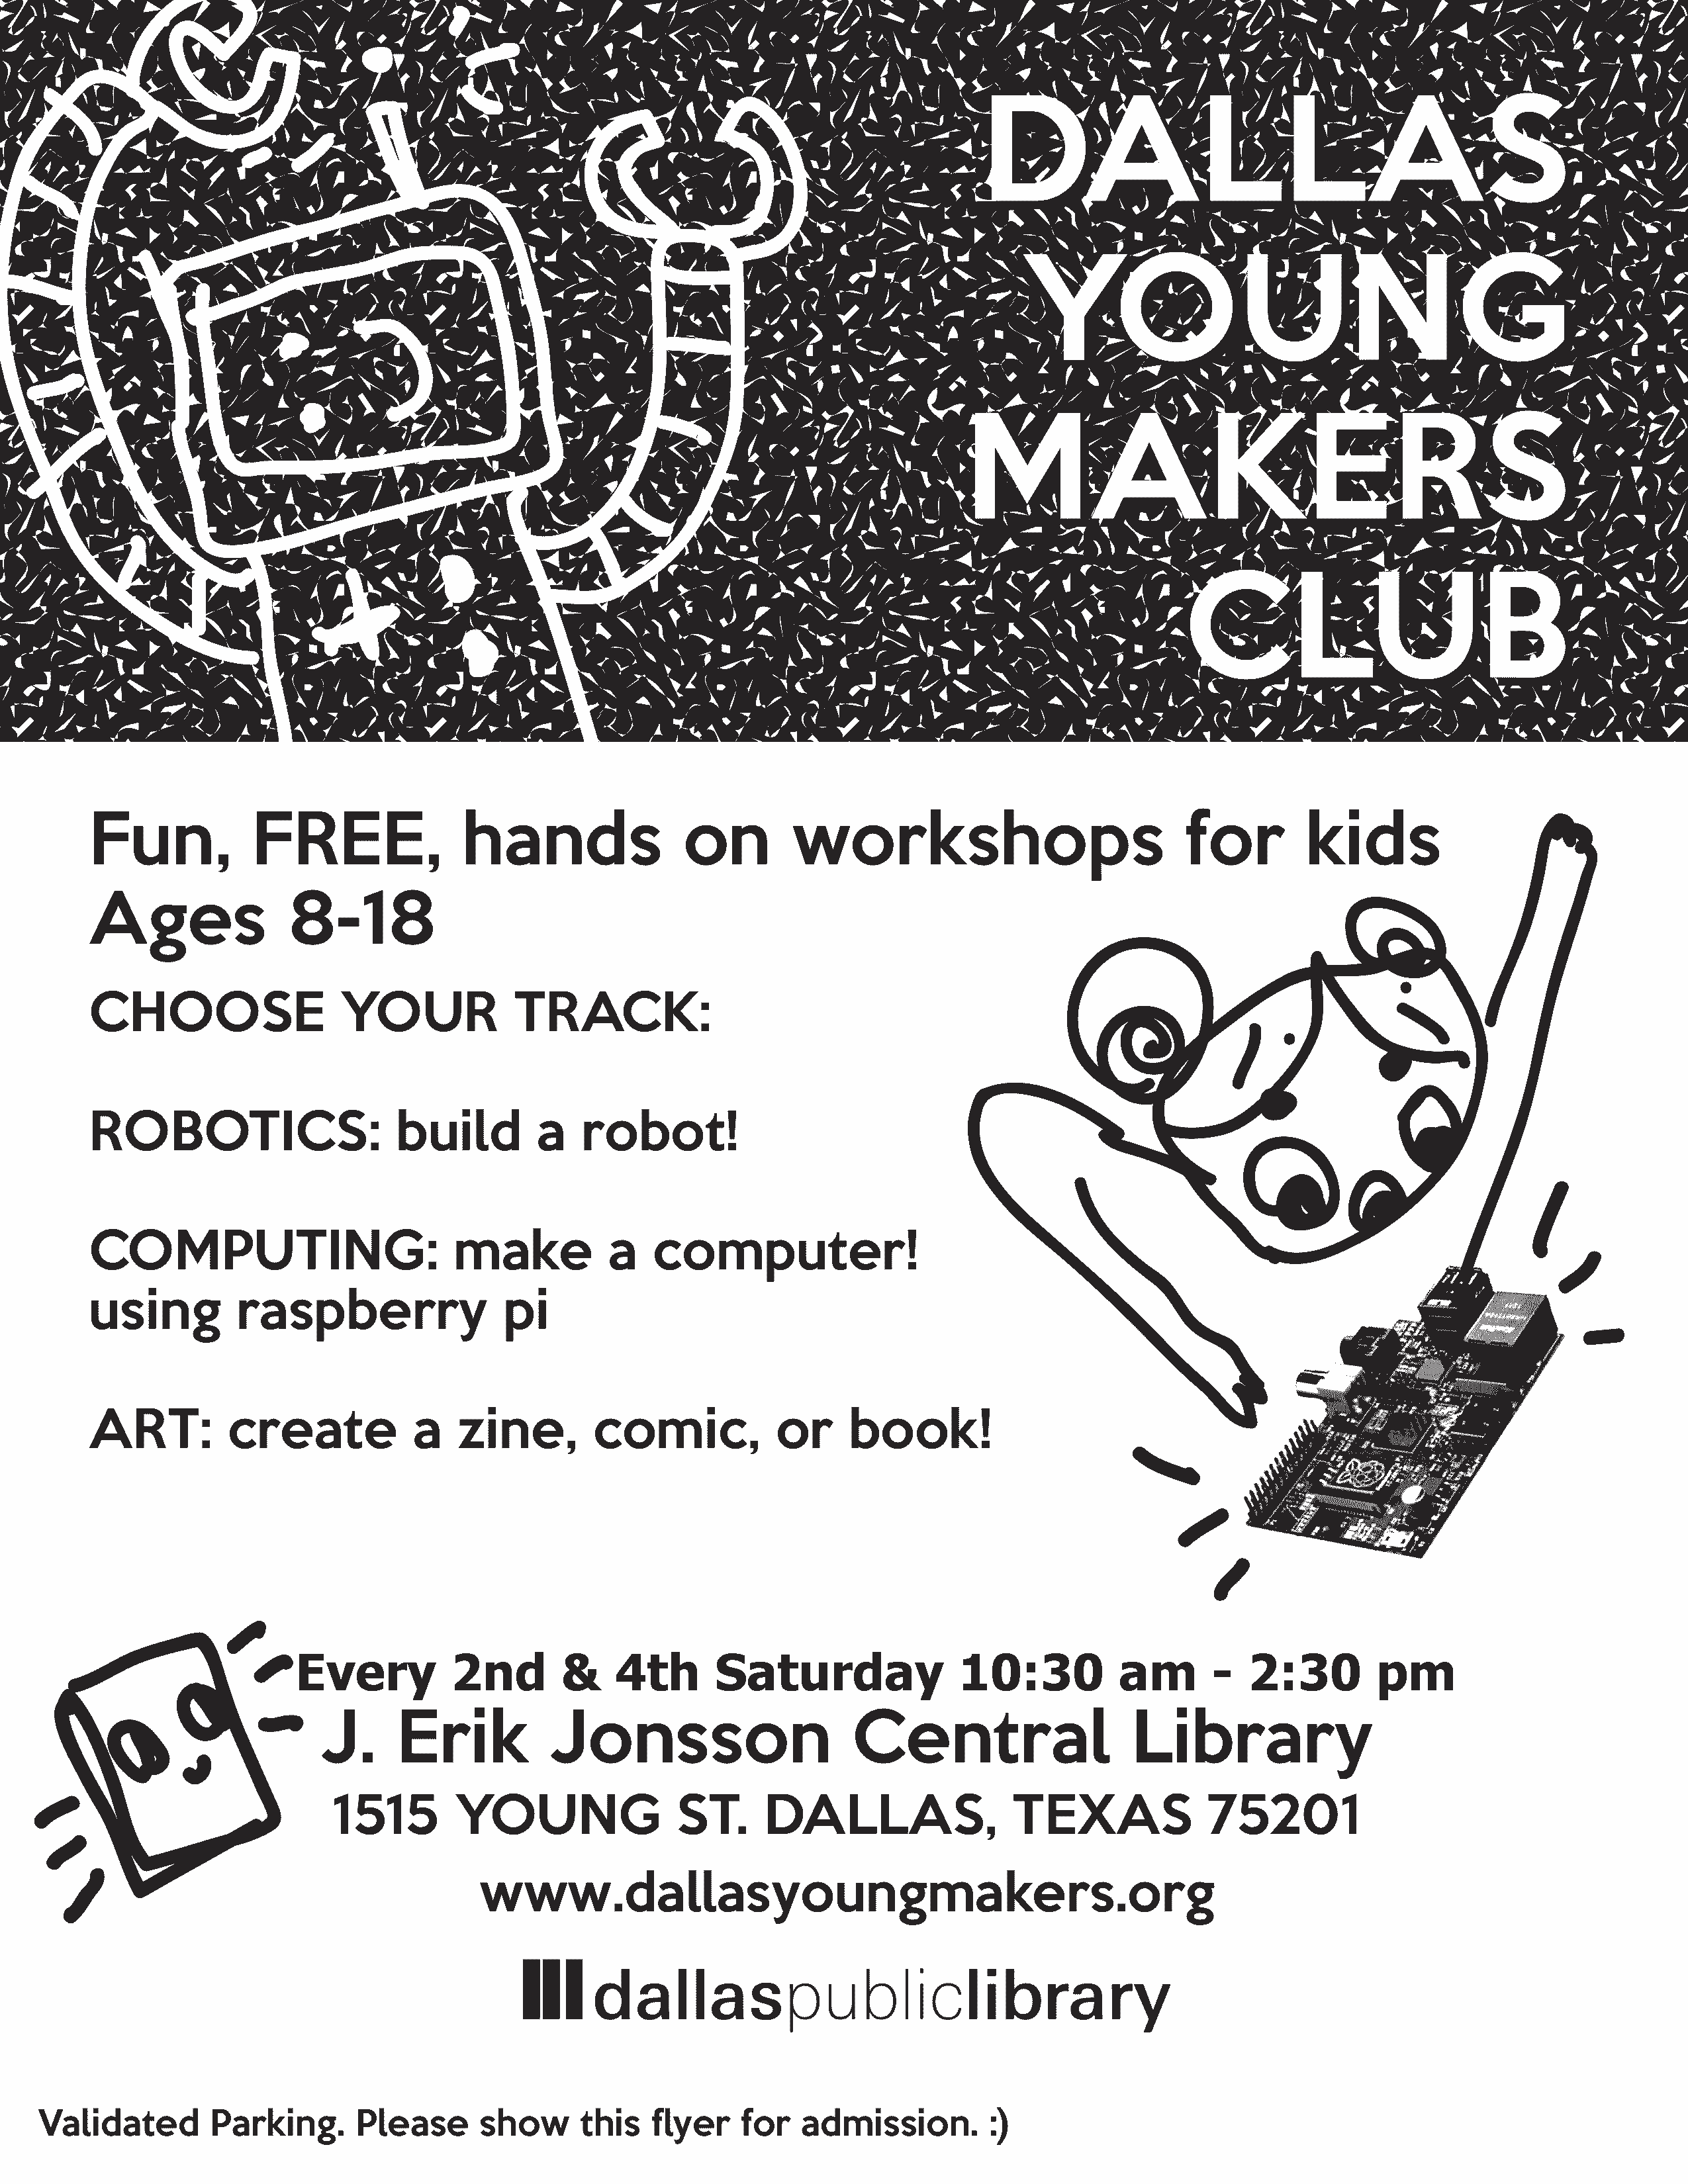 Flyer for young makers club